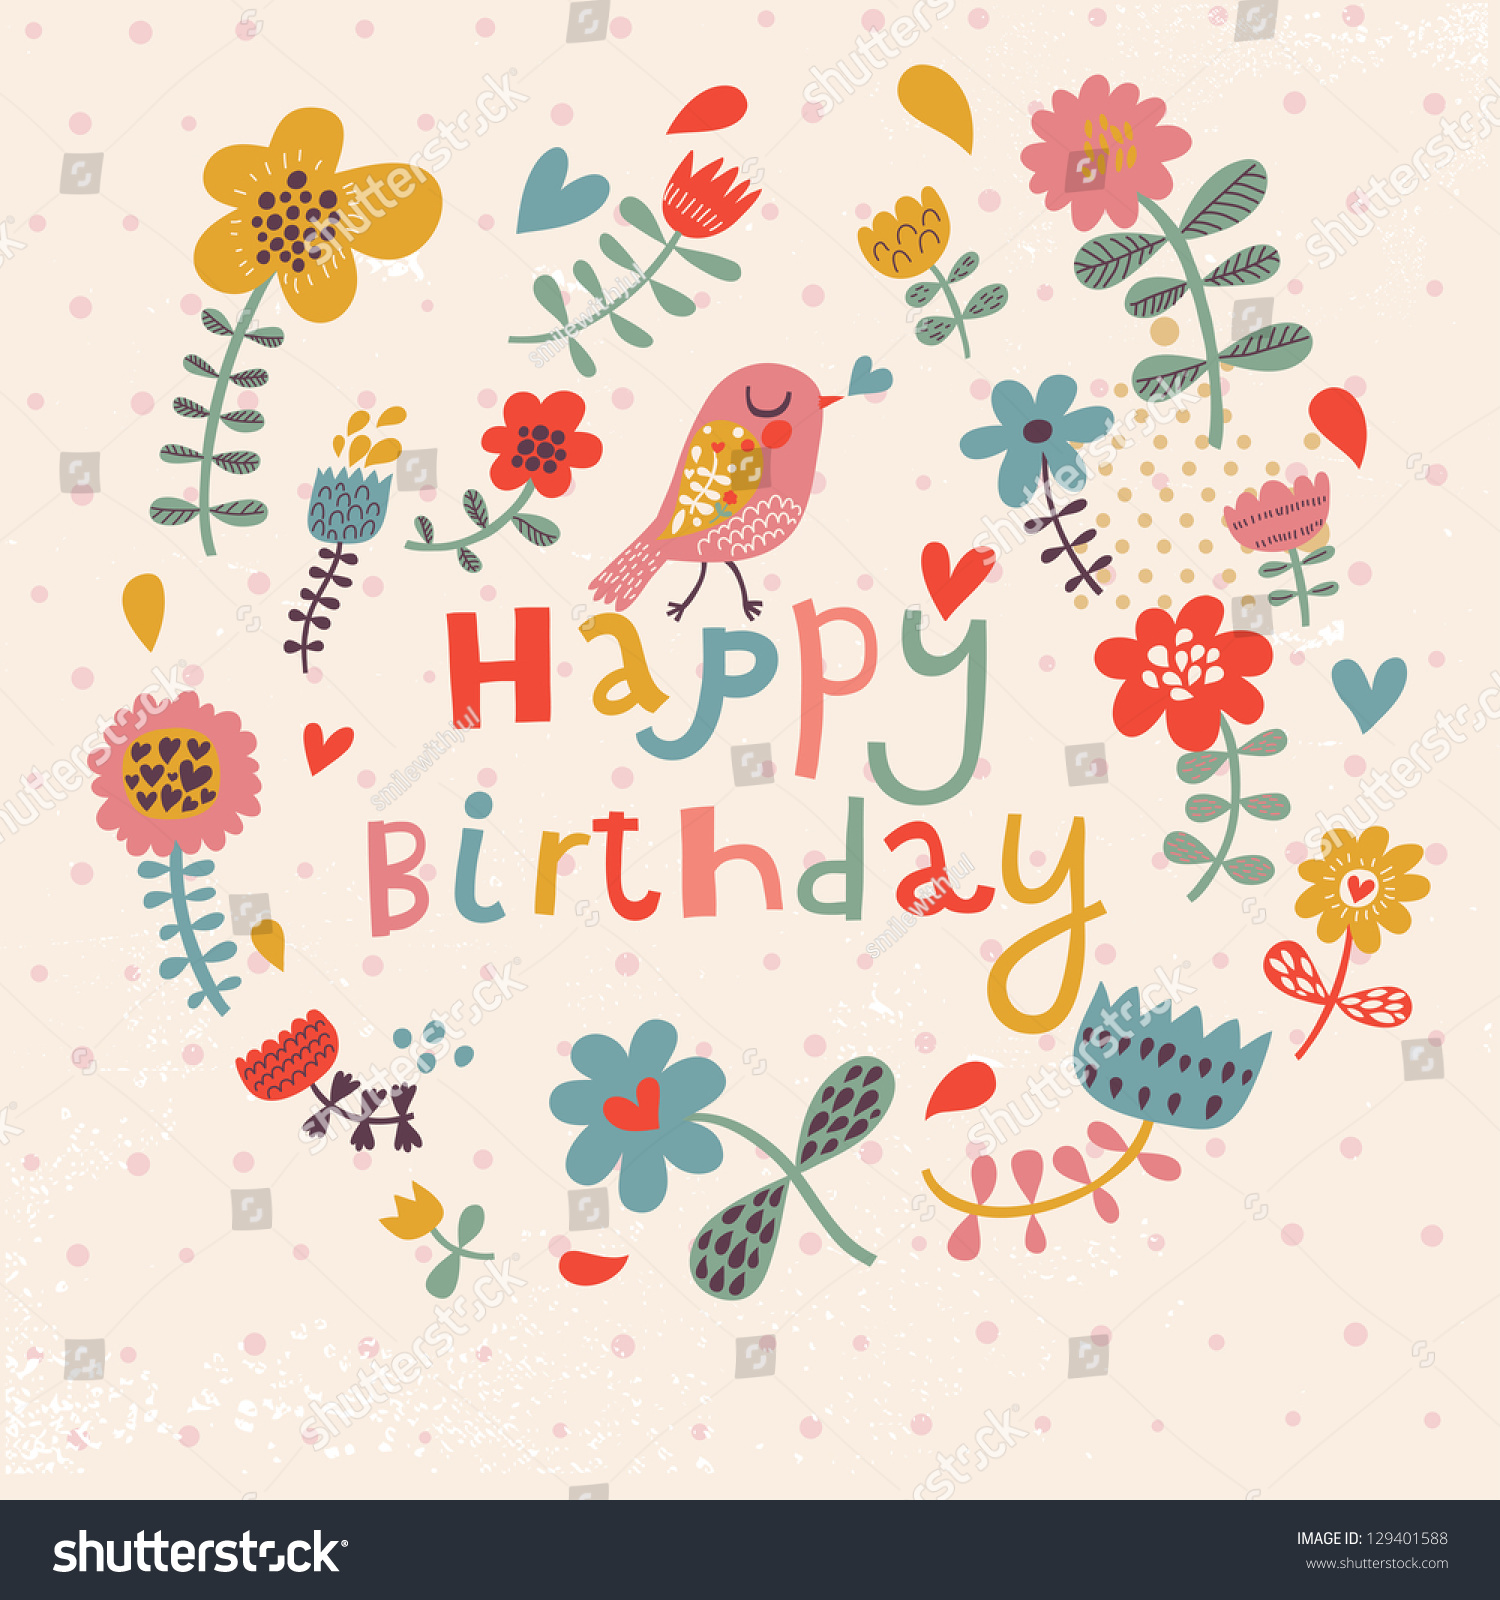 stock-vector-beautiful-happy-birthday-greeting-card-with-flowers-and-bird-vector-party-invitation-with-floral-129401588